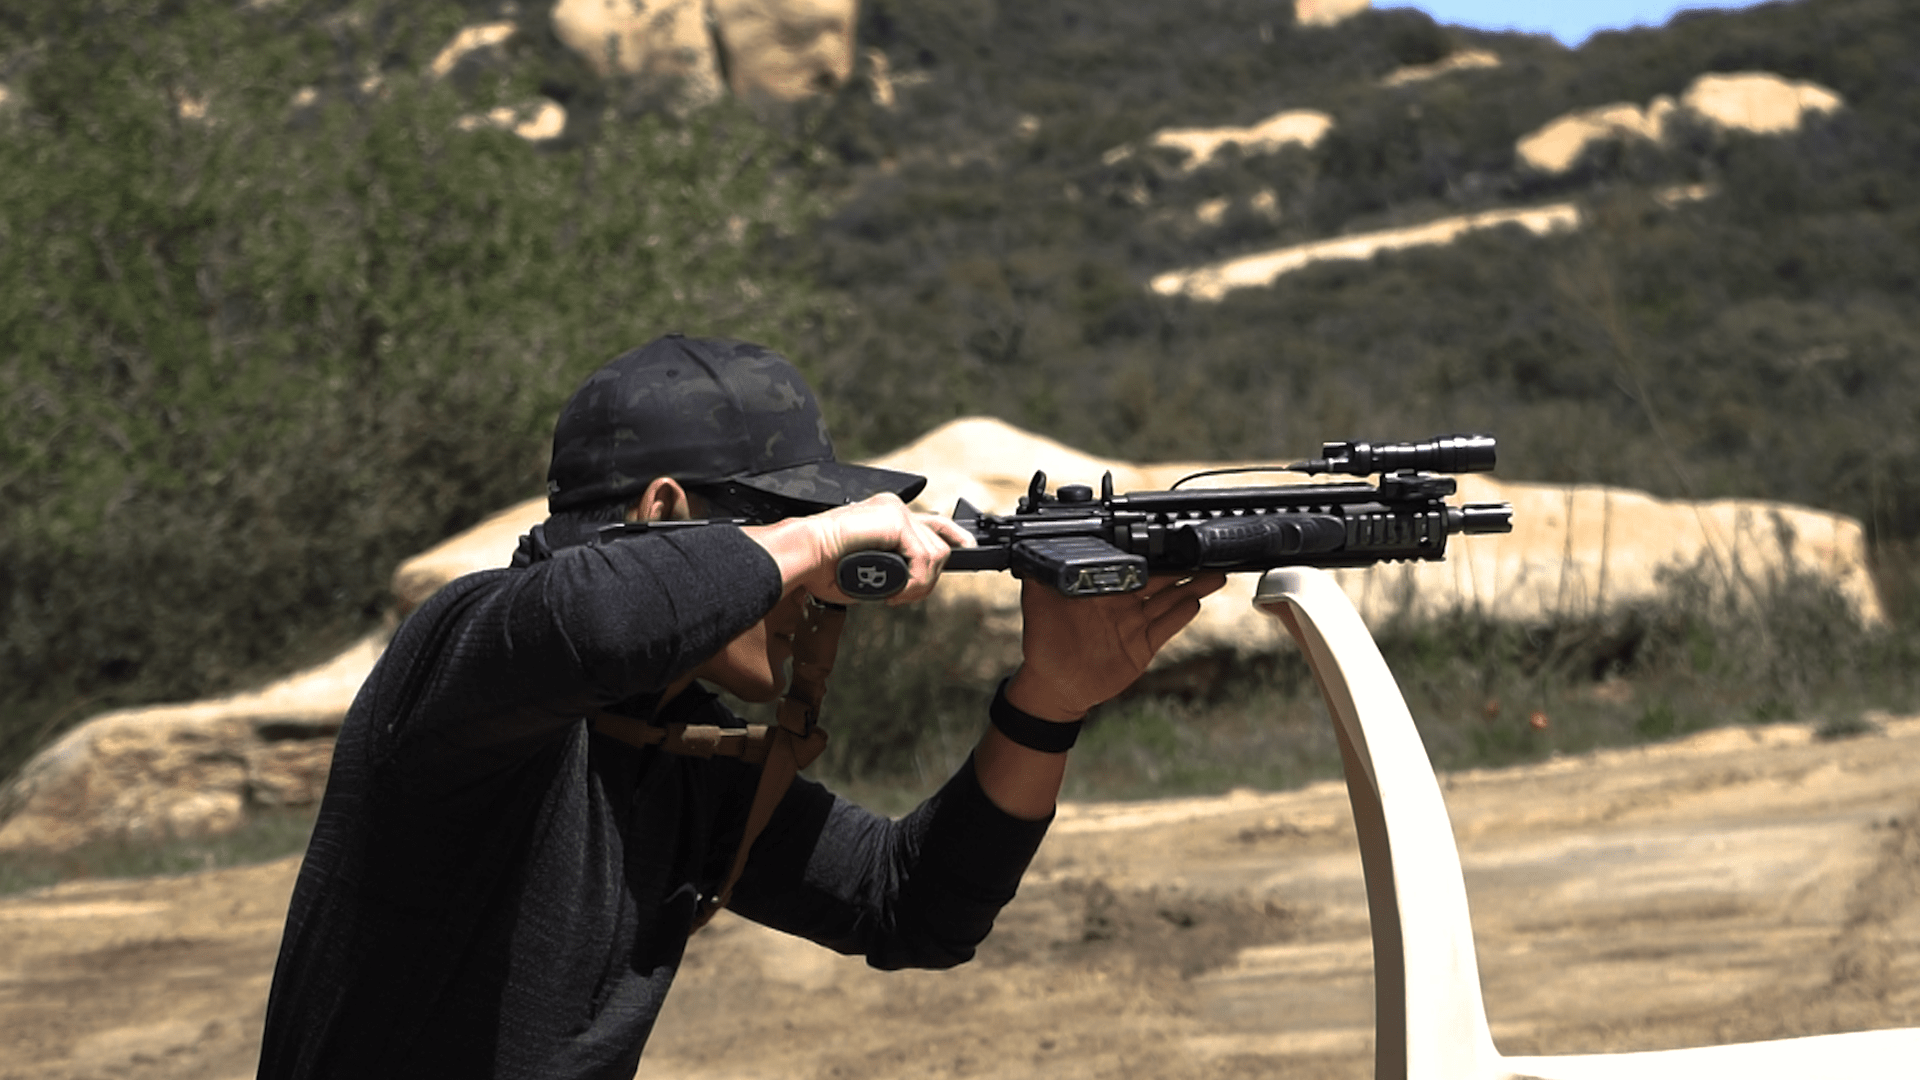 Shooting a Rifle When Canted 90-Degrees